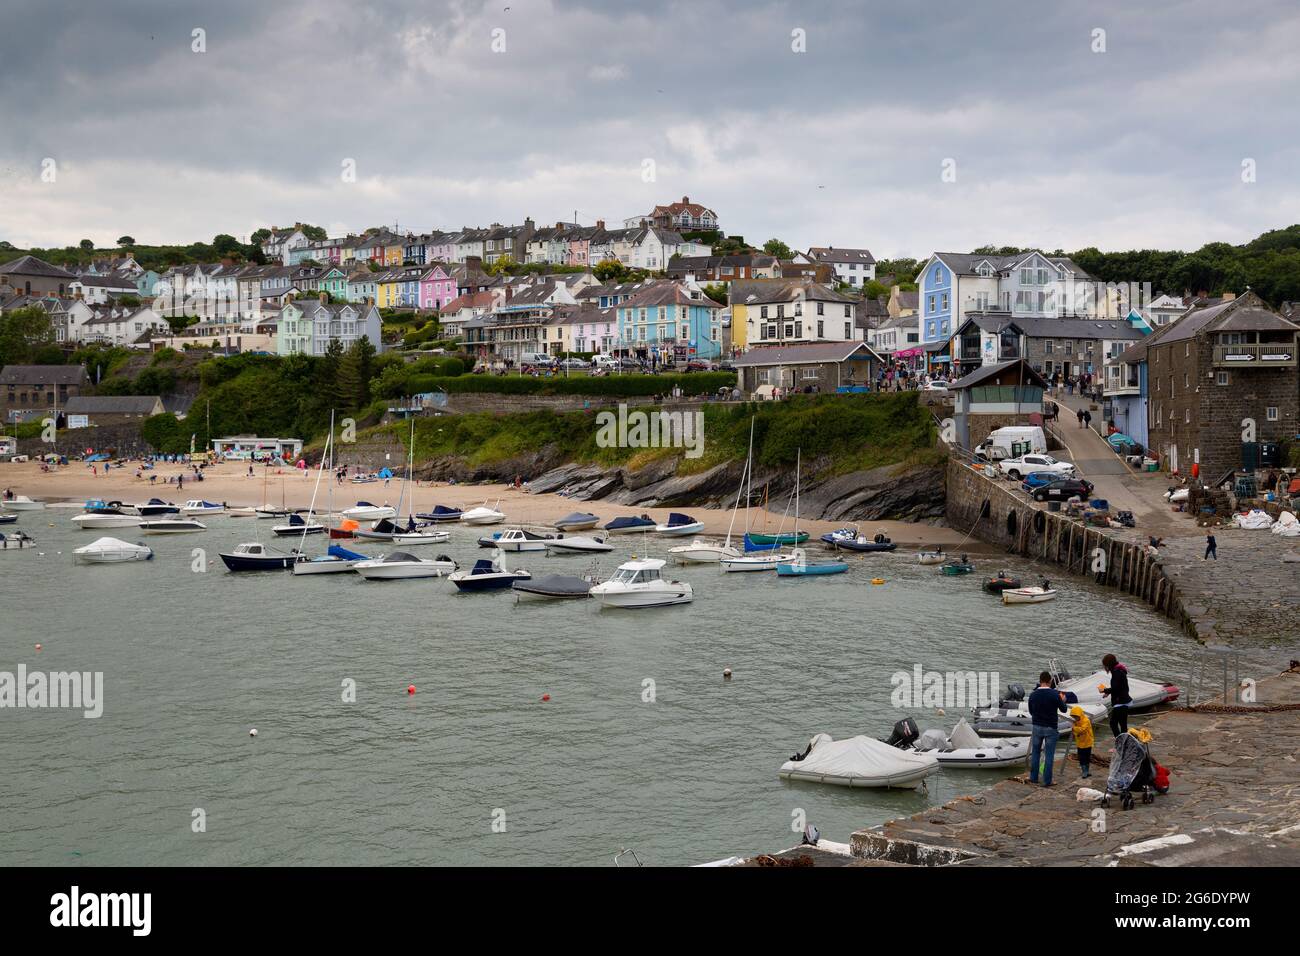 Editorial New Quay, UK - June 27, 2021: Once a quiet fishing village New Quay is now a top holiday destination on the West Wales coast in the UK. Stock Photo